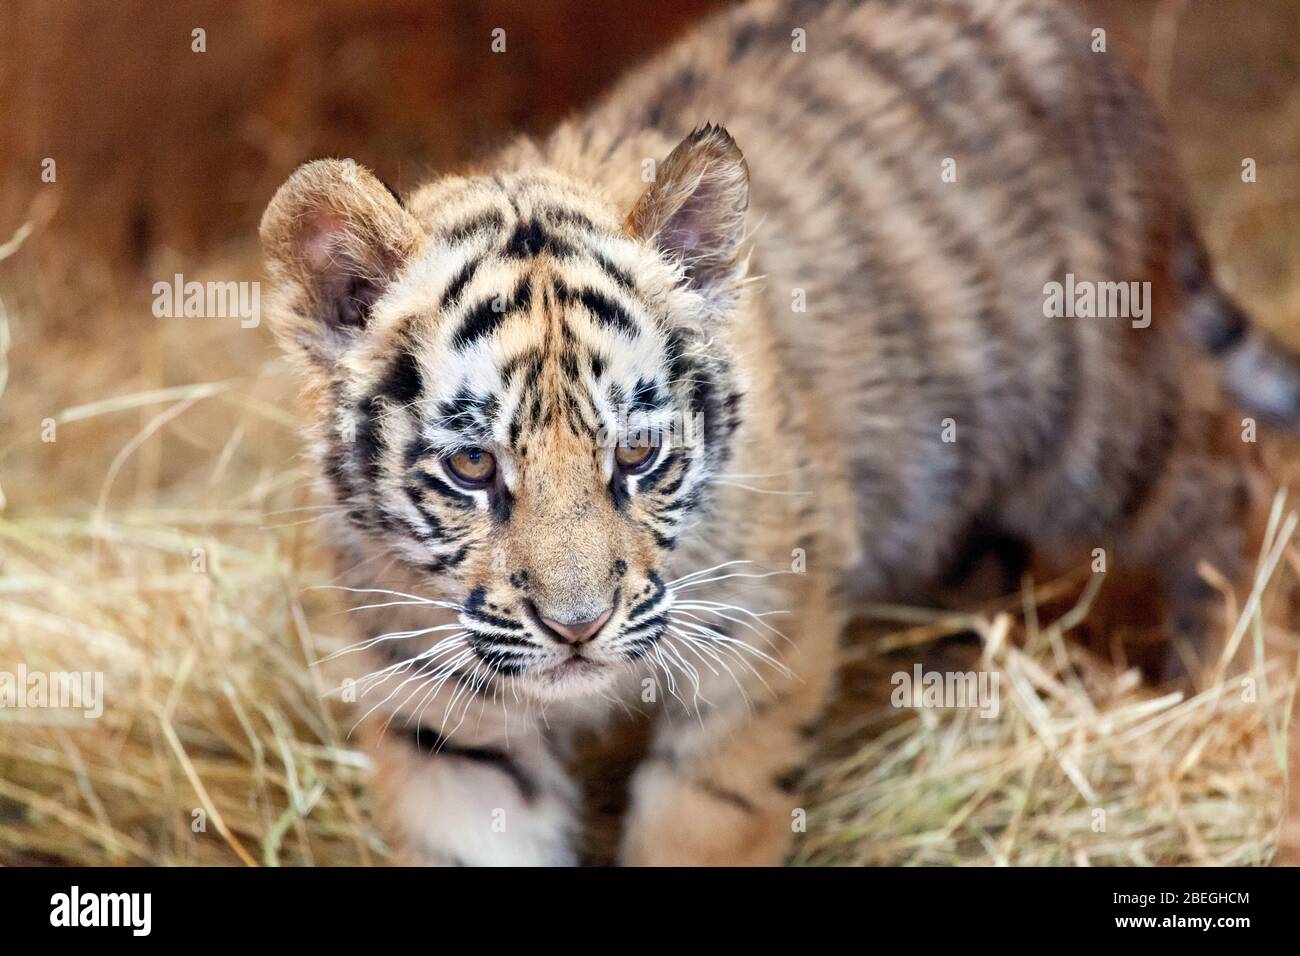 Young tiger cub in animal game park close-up Stock Photo